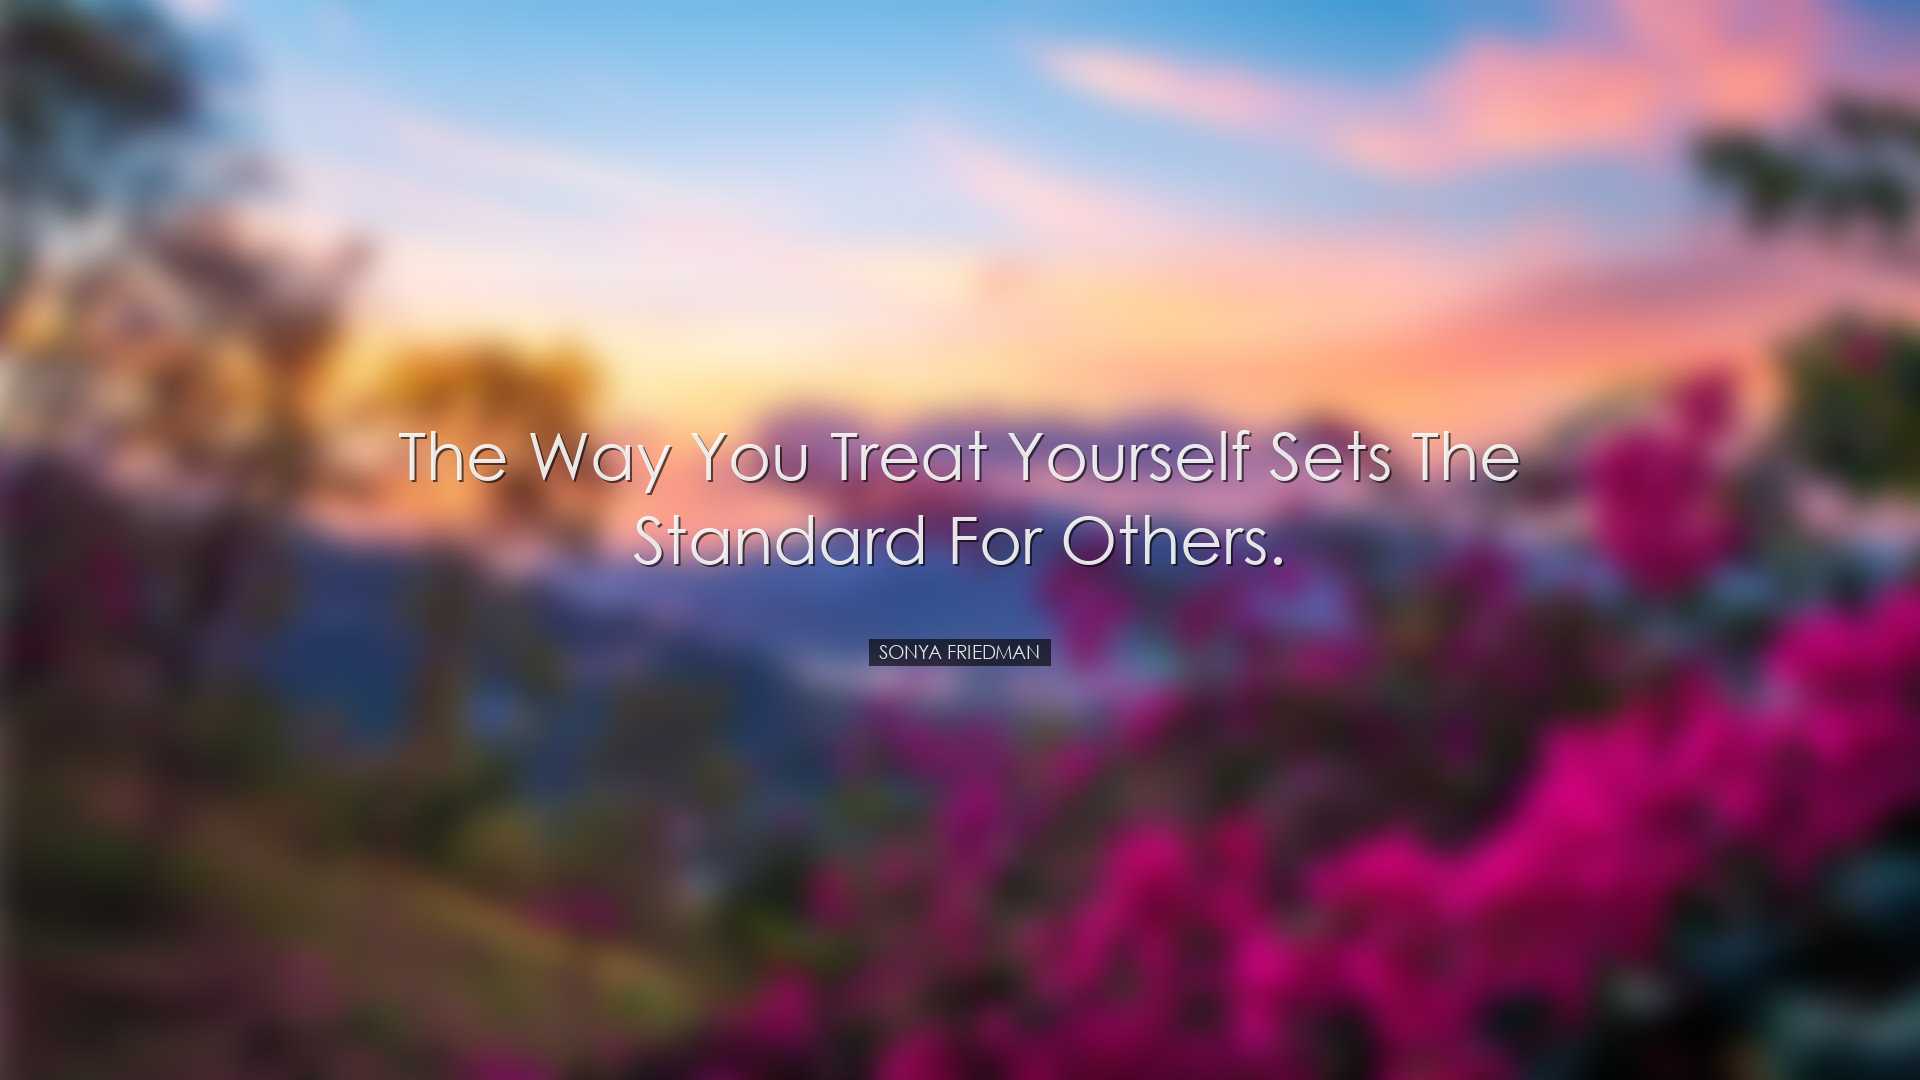 The way you treat yourself sets the standard for others. - Sonya F